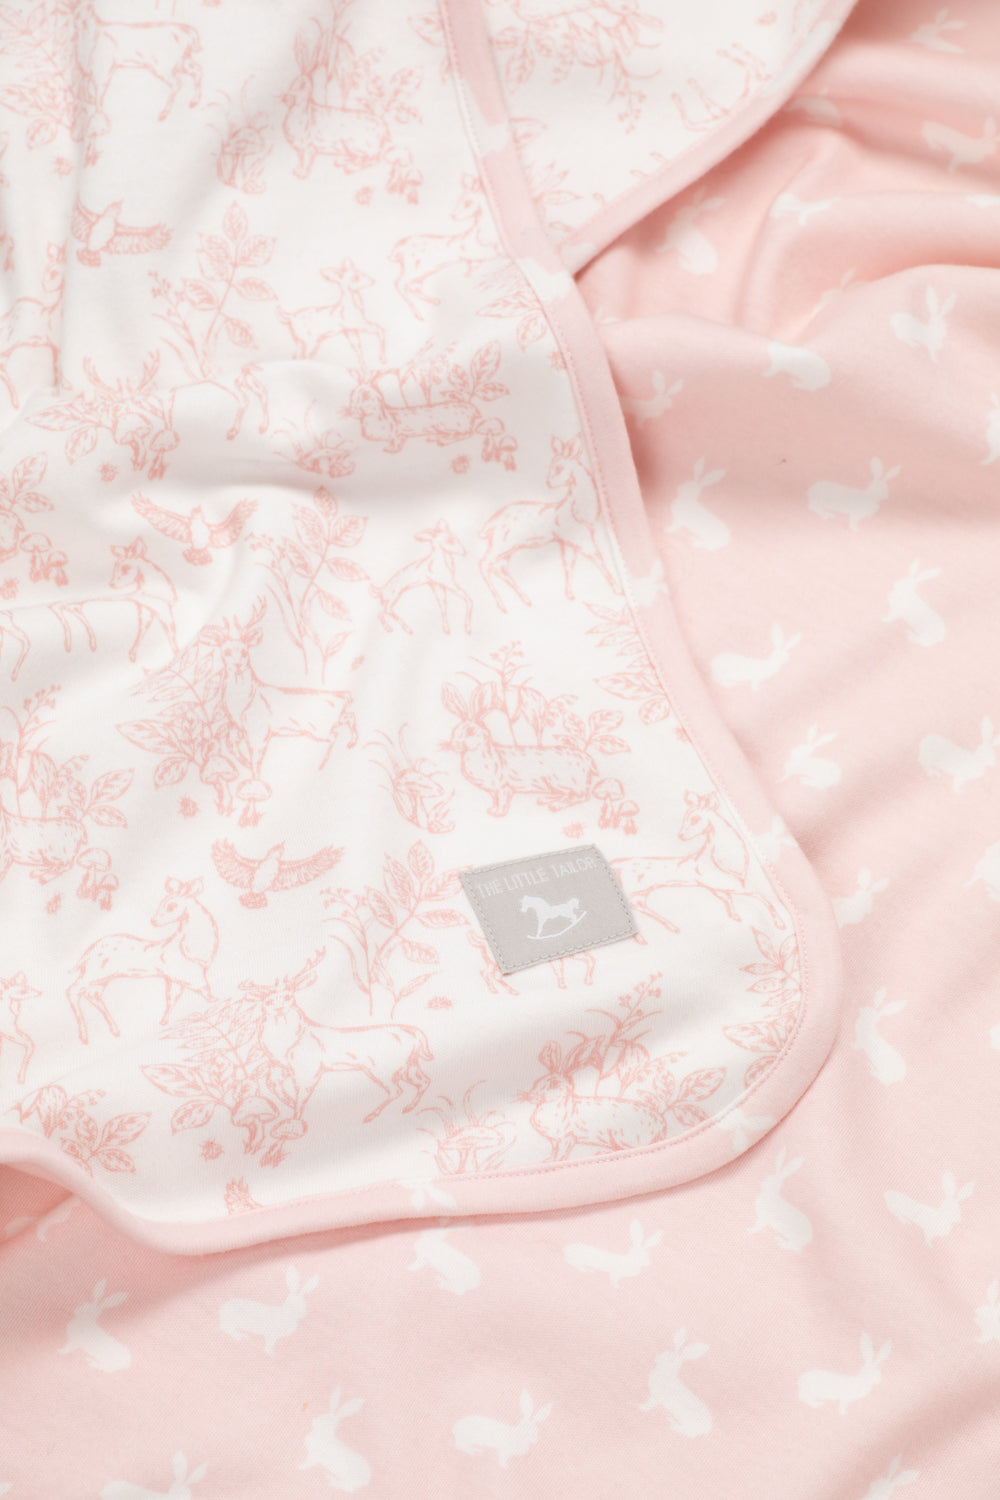 Jersey Blanket, pink woodland and hare print